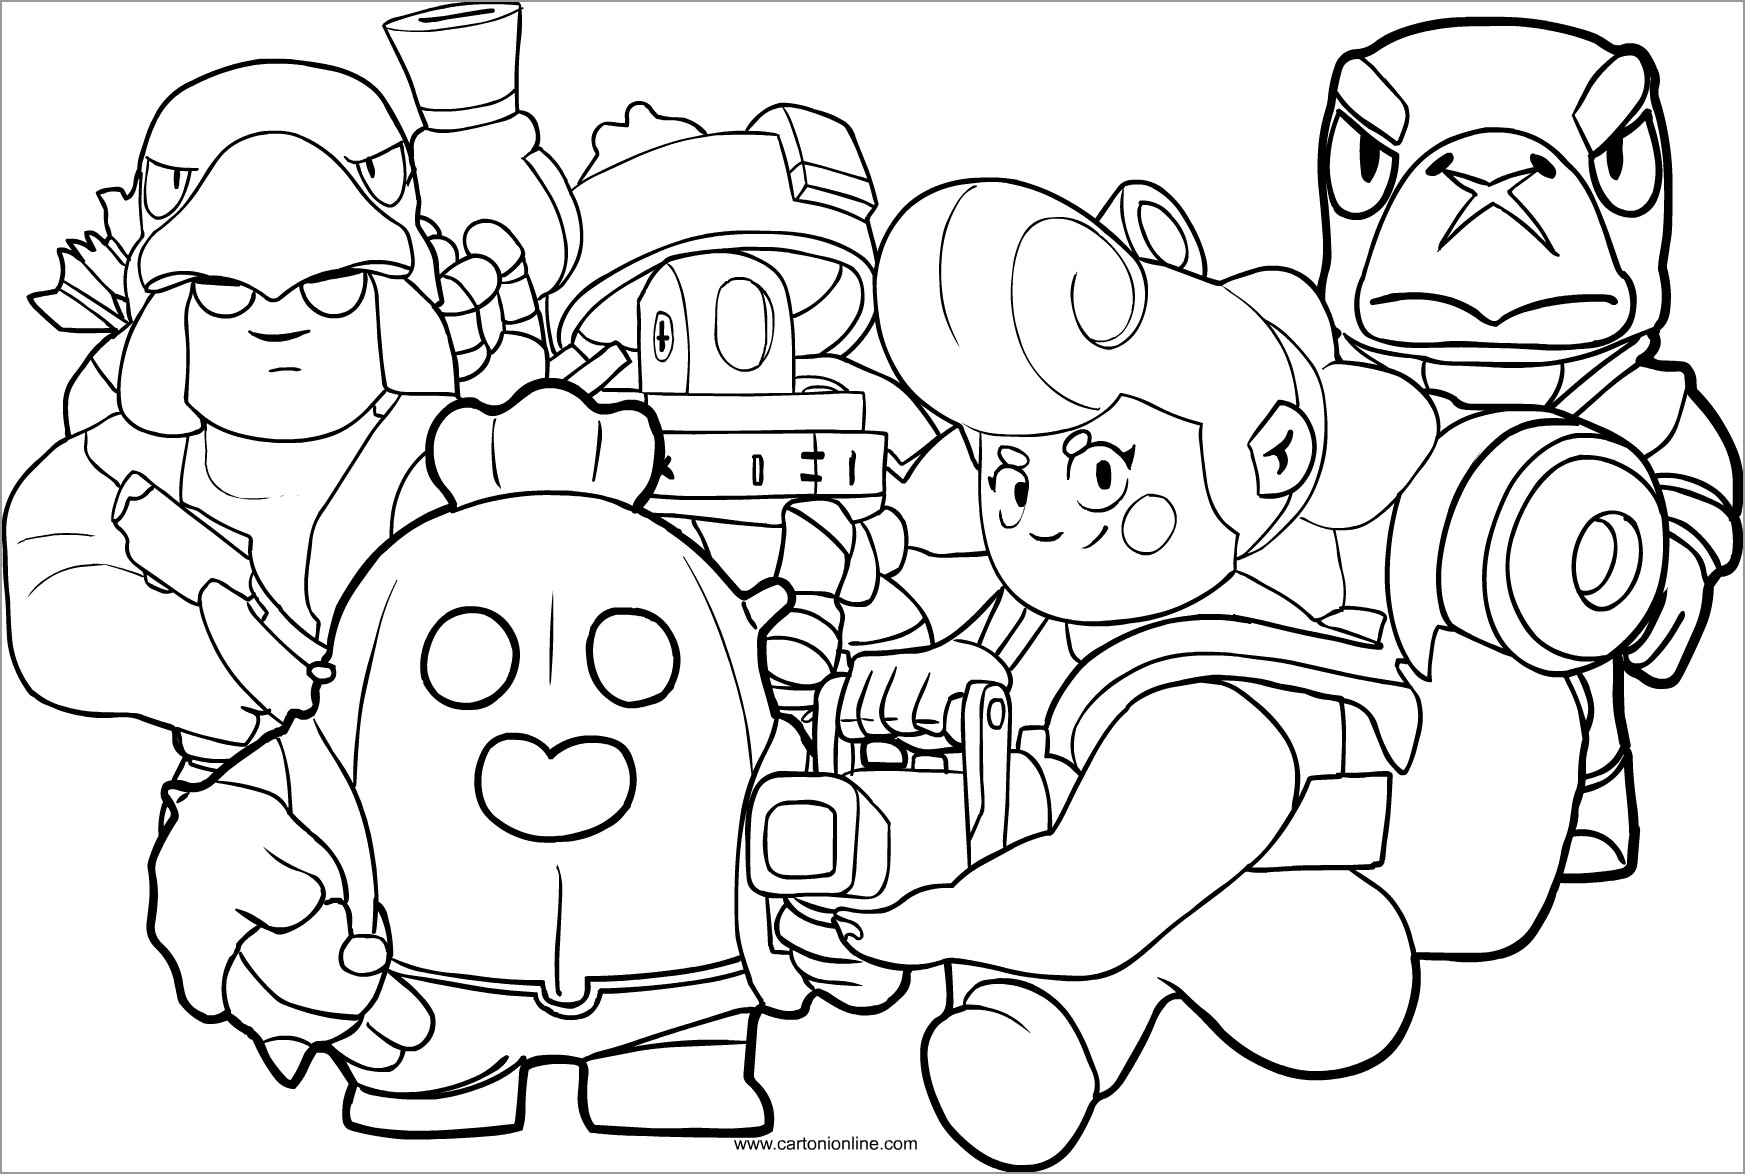 Brawl Stars Characters Coloring Page